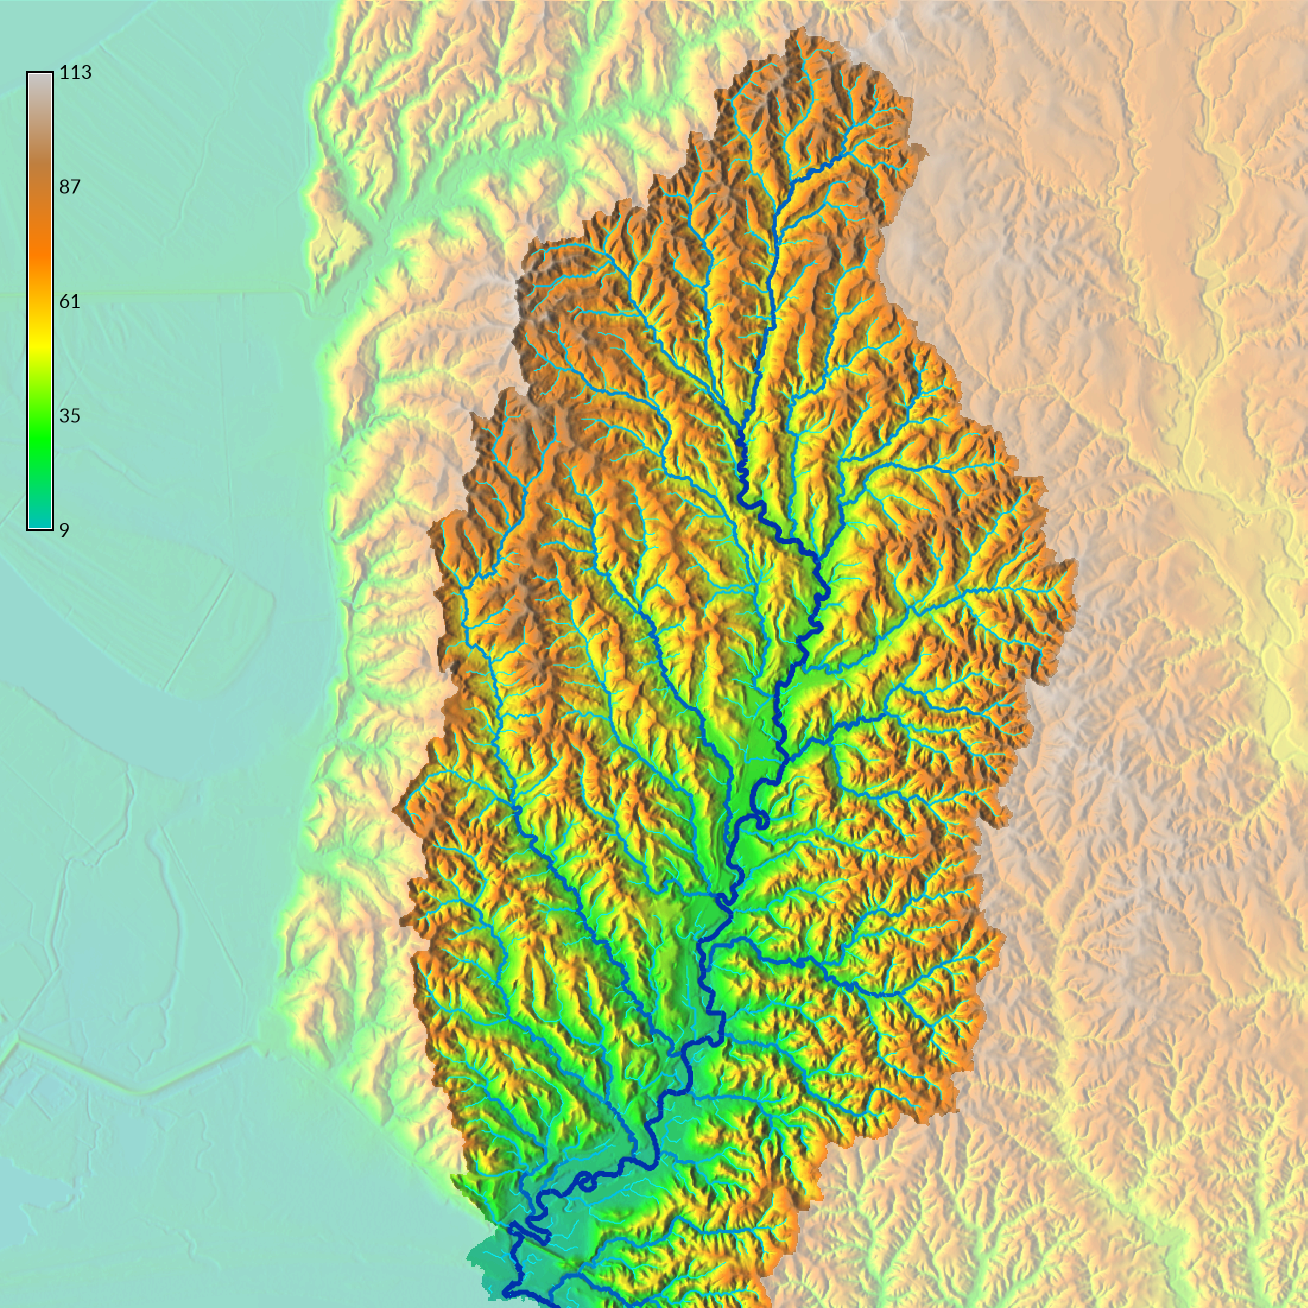 Shaded relief with streams